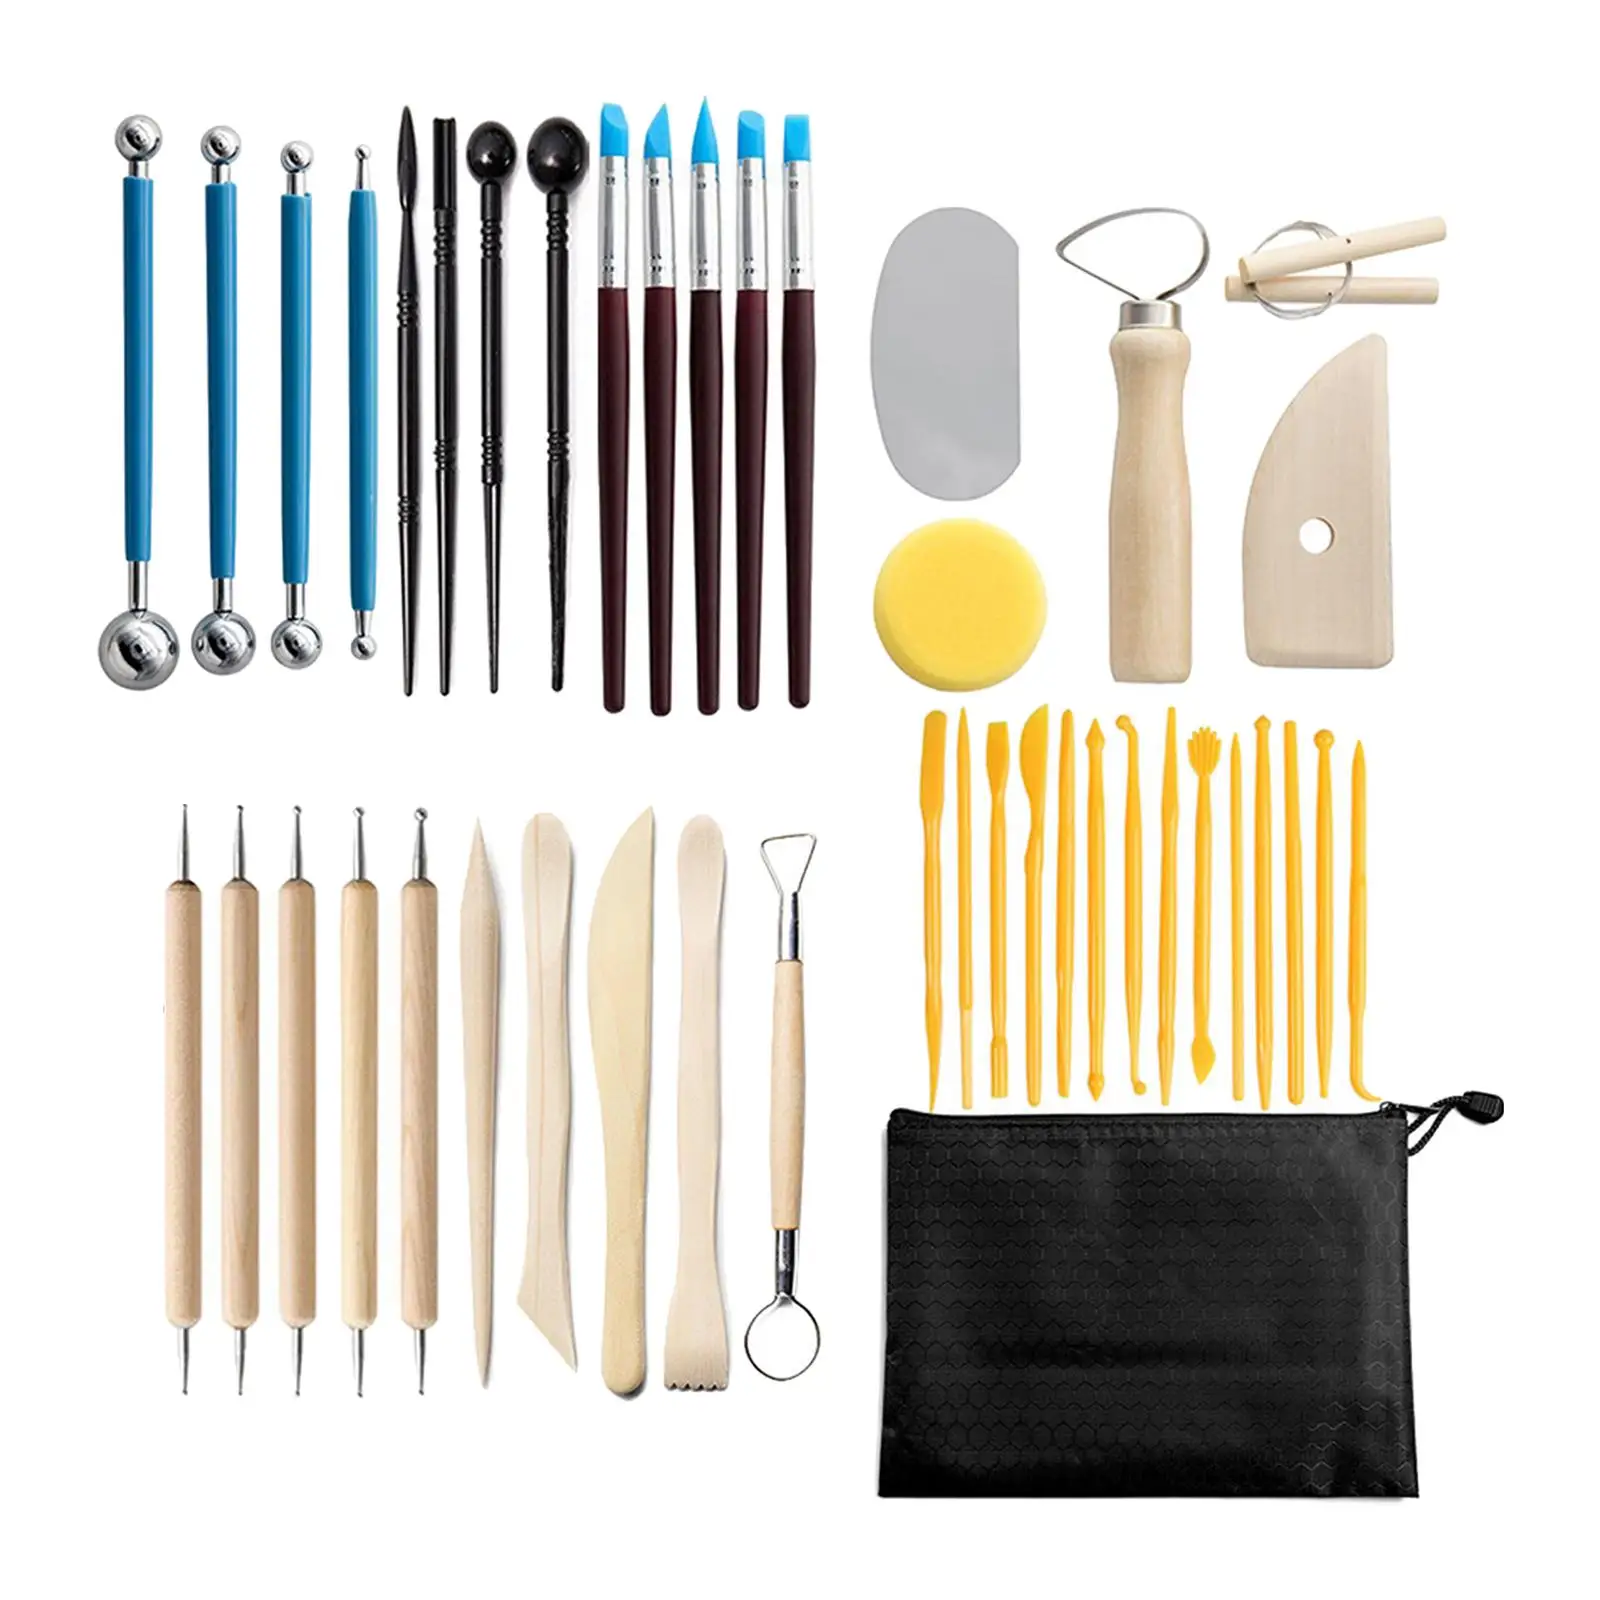 42pcs Clay Sculpting Set Carving Kit Wooden for Modelling Dotting Cutting Beginners Clay